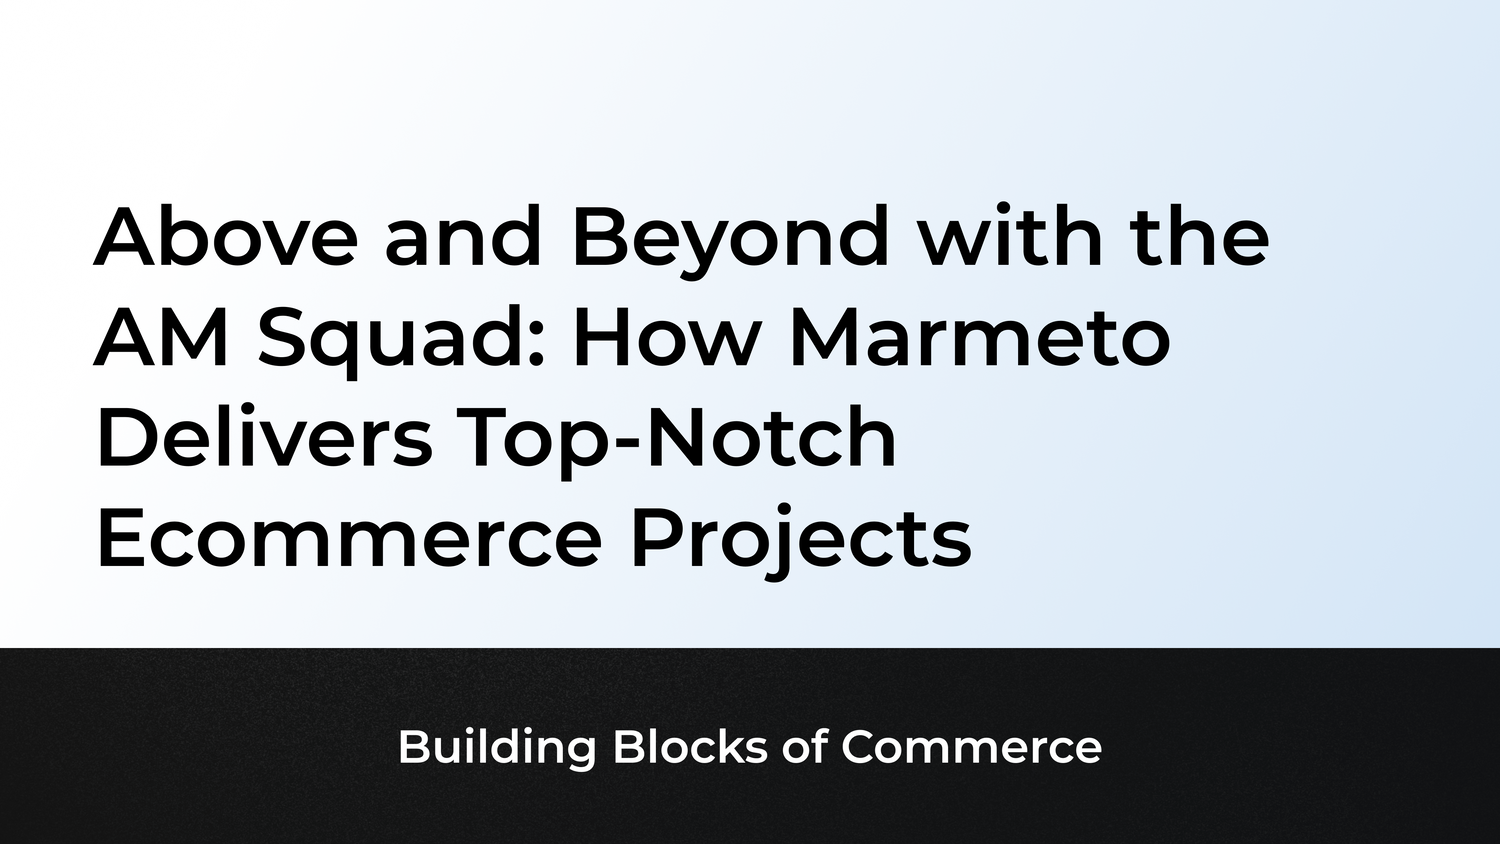 Above and Beyond with the AM Squad : How Marmeto Delivers Top-Notch Ecommerce Projects